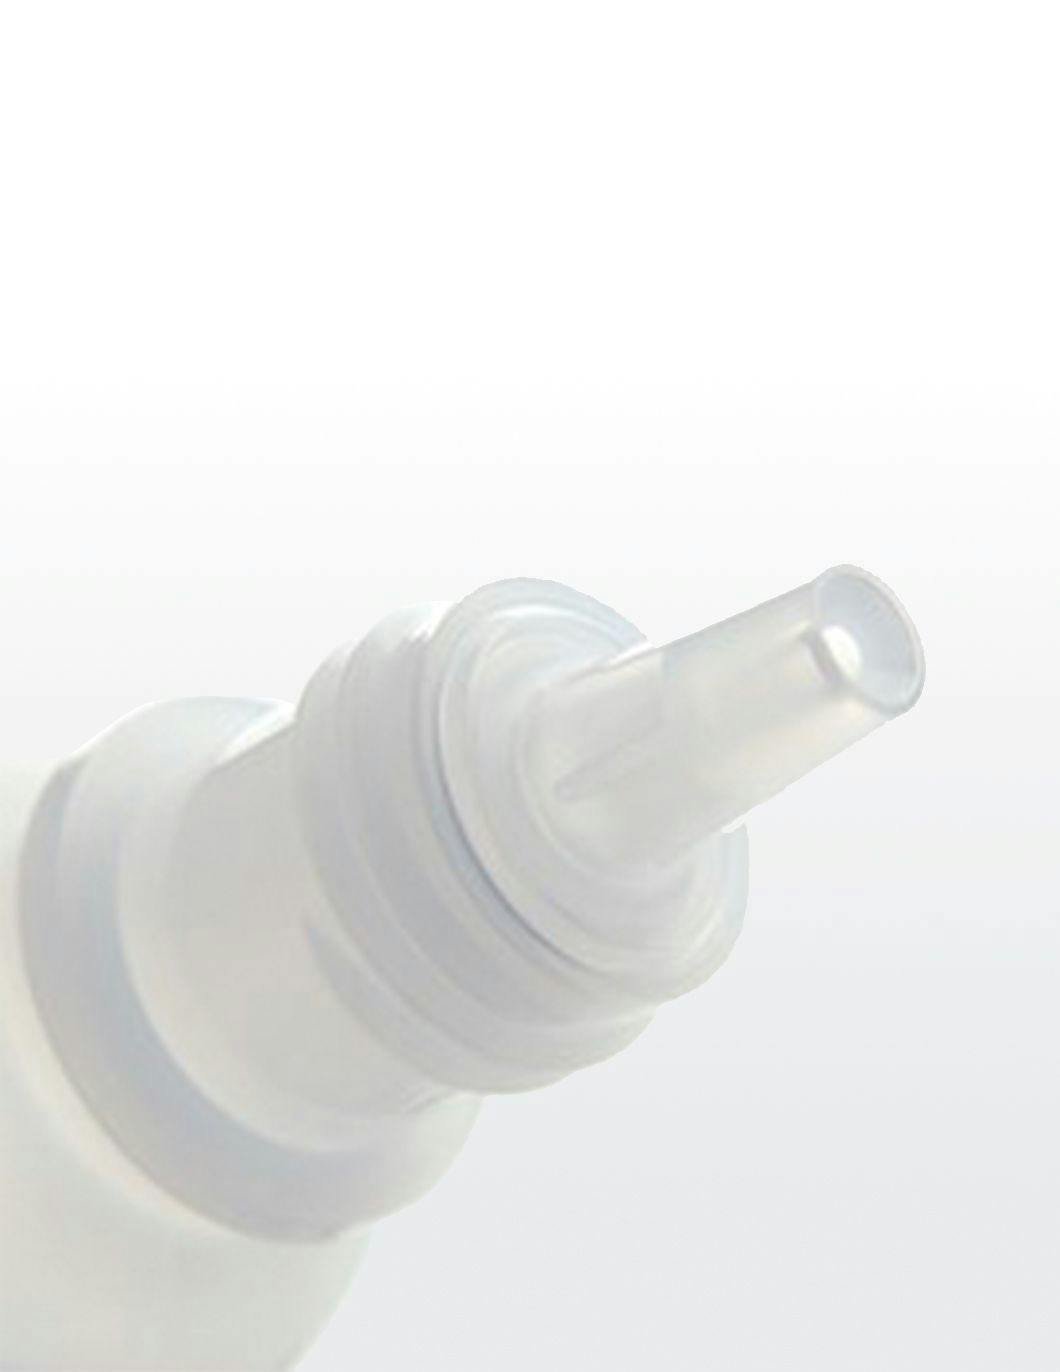 ophthalmic-bottles-15ml-with-60-dropper-opening